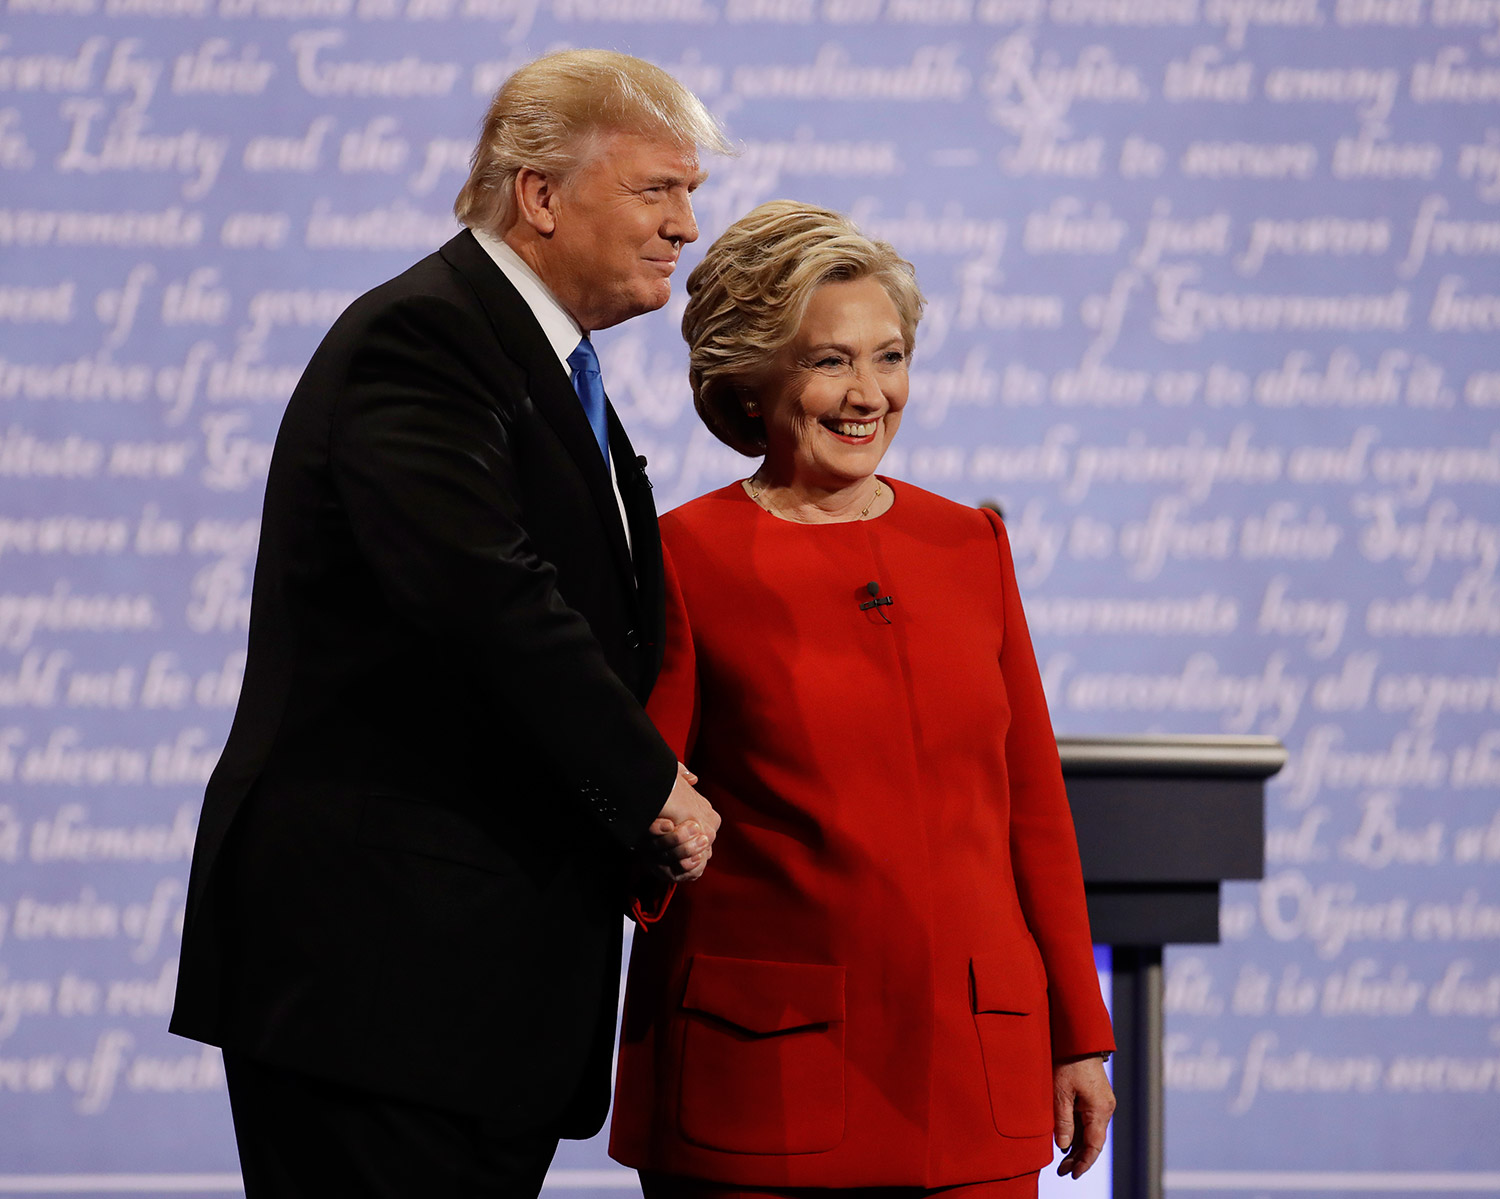 Hillary Clinton and Donald Trump shake hands before Monday night's presidential debate at Hofstra University in Hempstead, N.Y.